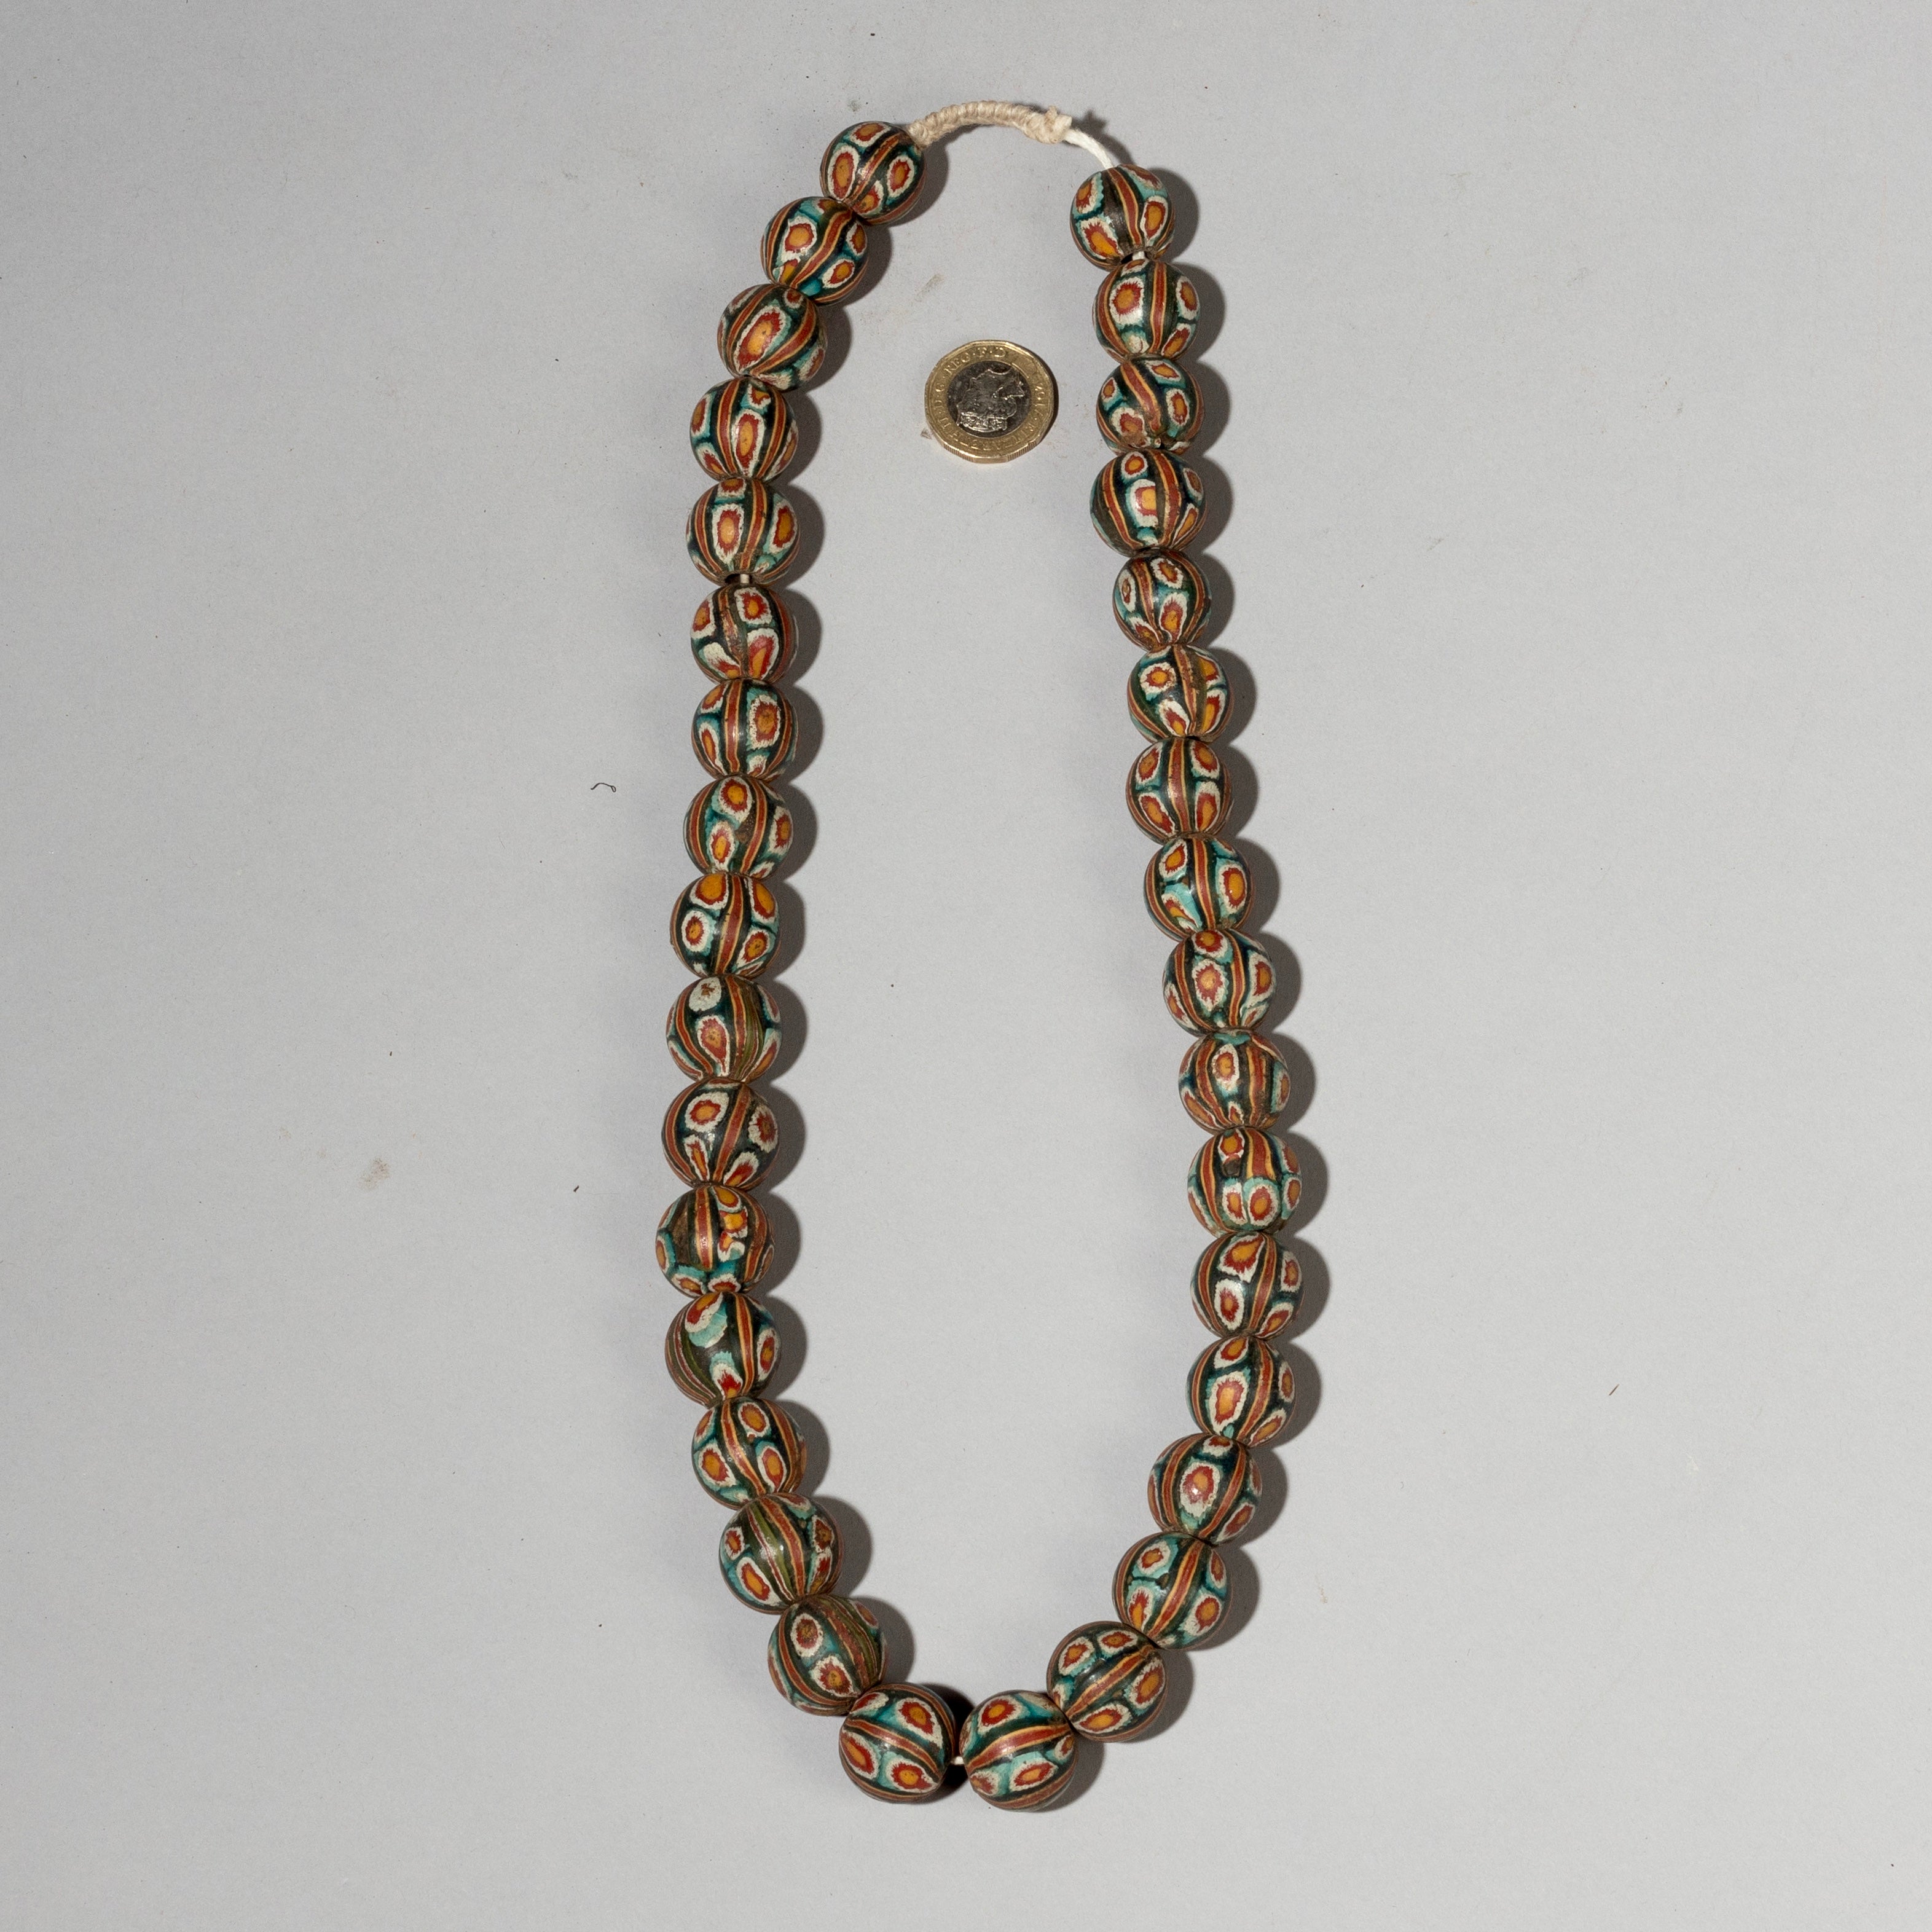 A GREEN, RED, YELLOW + WHITE SOLID GLASS NECKLACE FROM JAVA( No 2098)